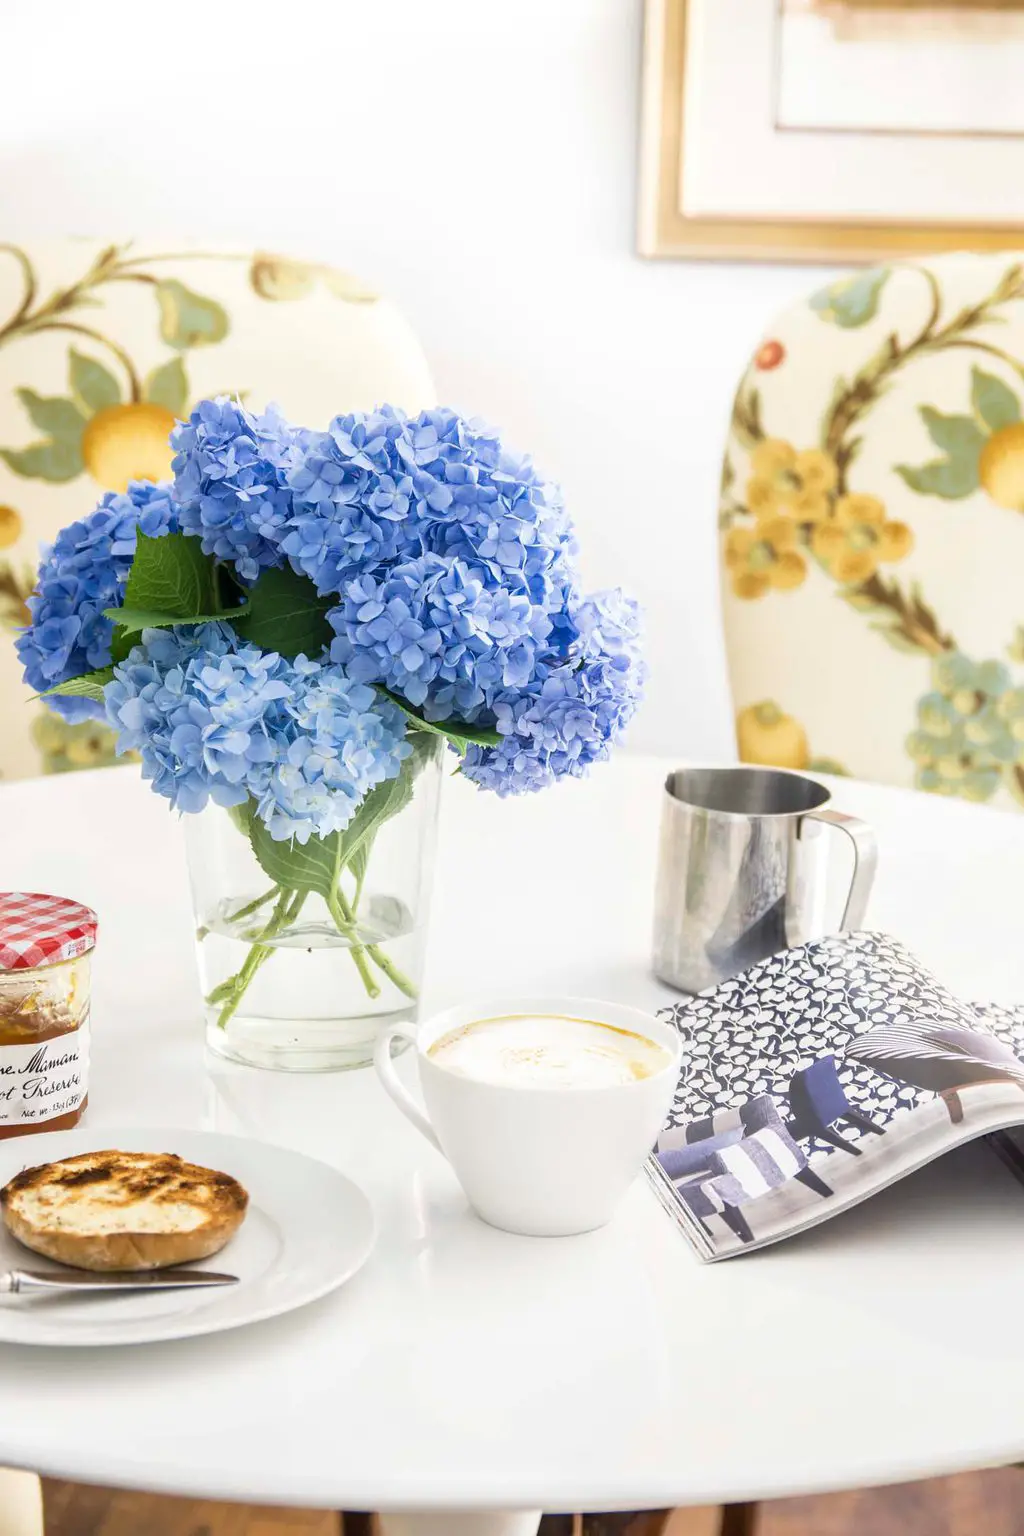 Morning breakfast with blue hydrangeas and Hive smart home devices on Thou Swell @thouswellblog